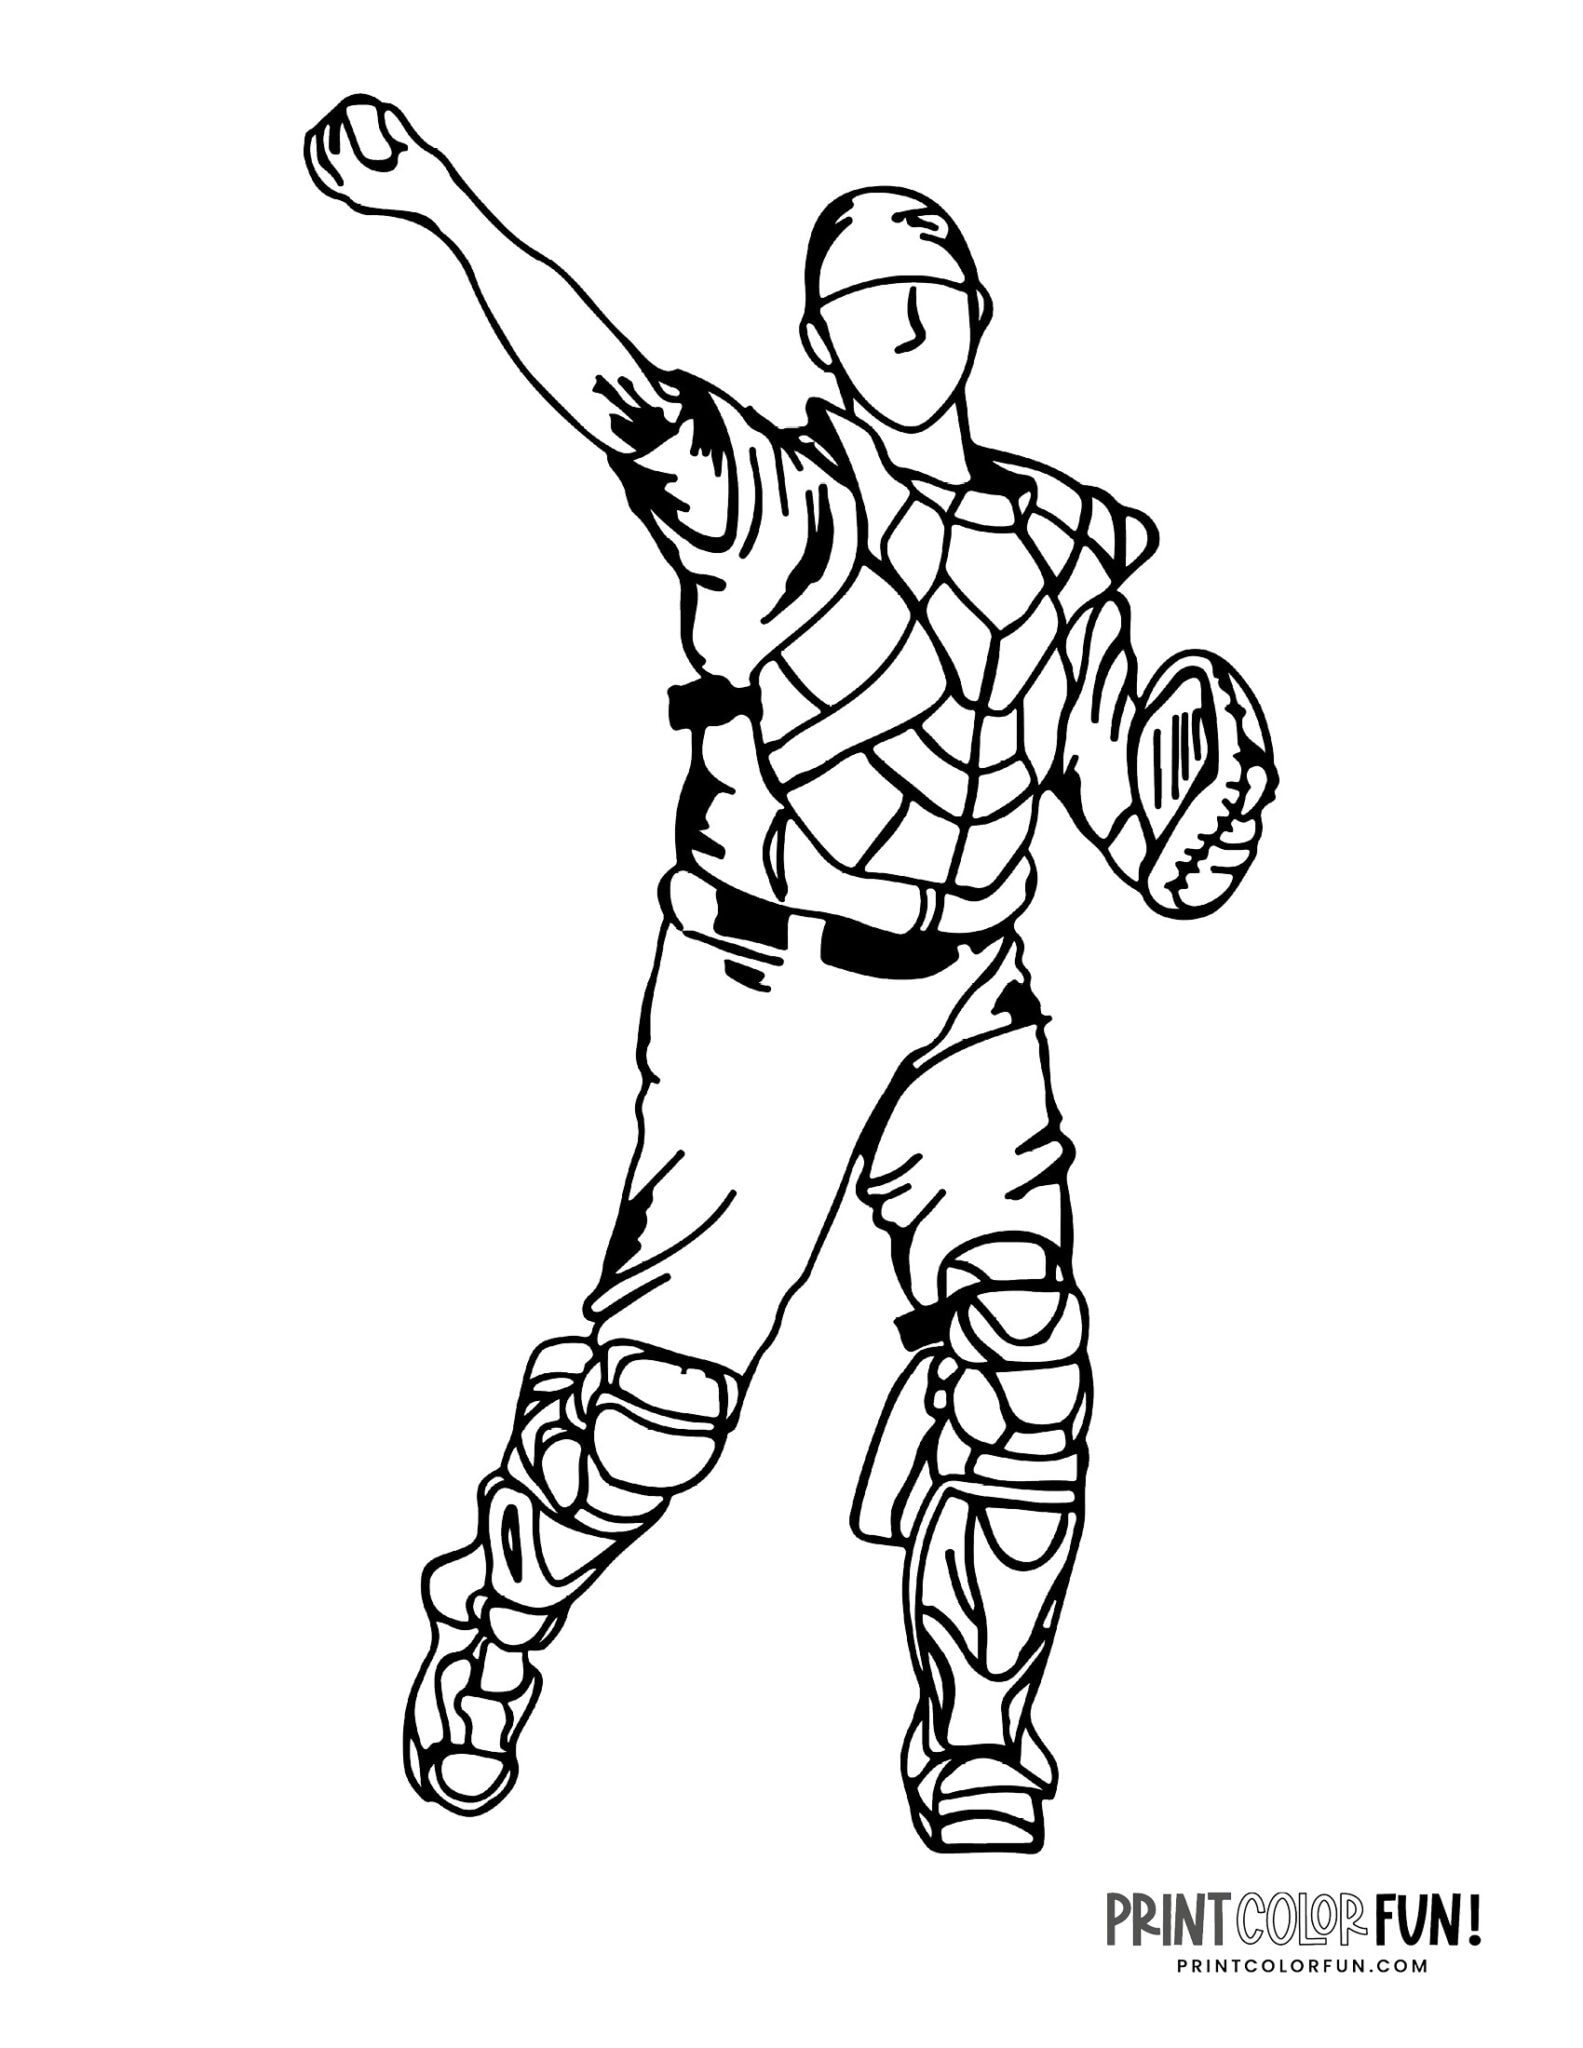 printable baseball pictures clipartsco - baseball player catcher ...